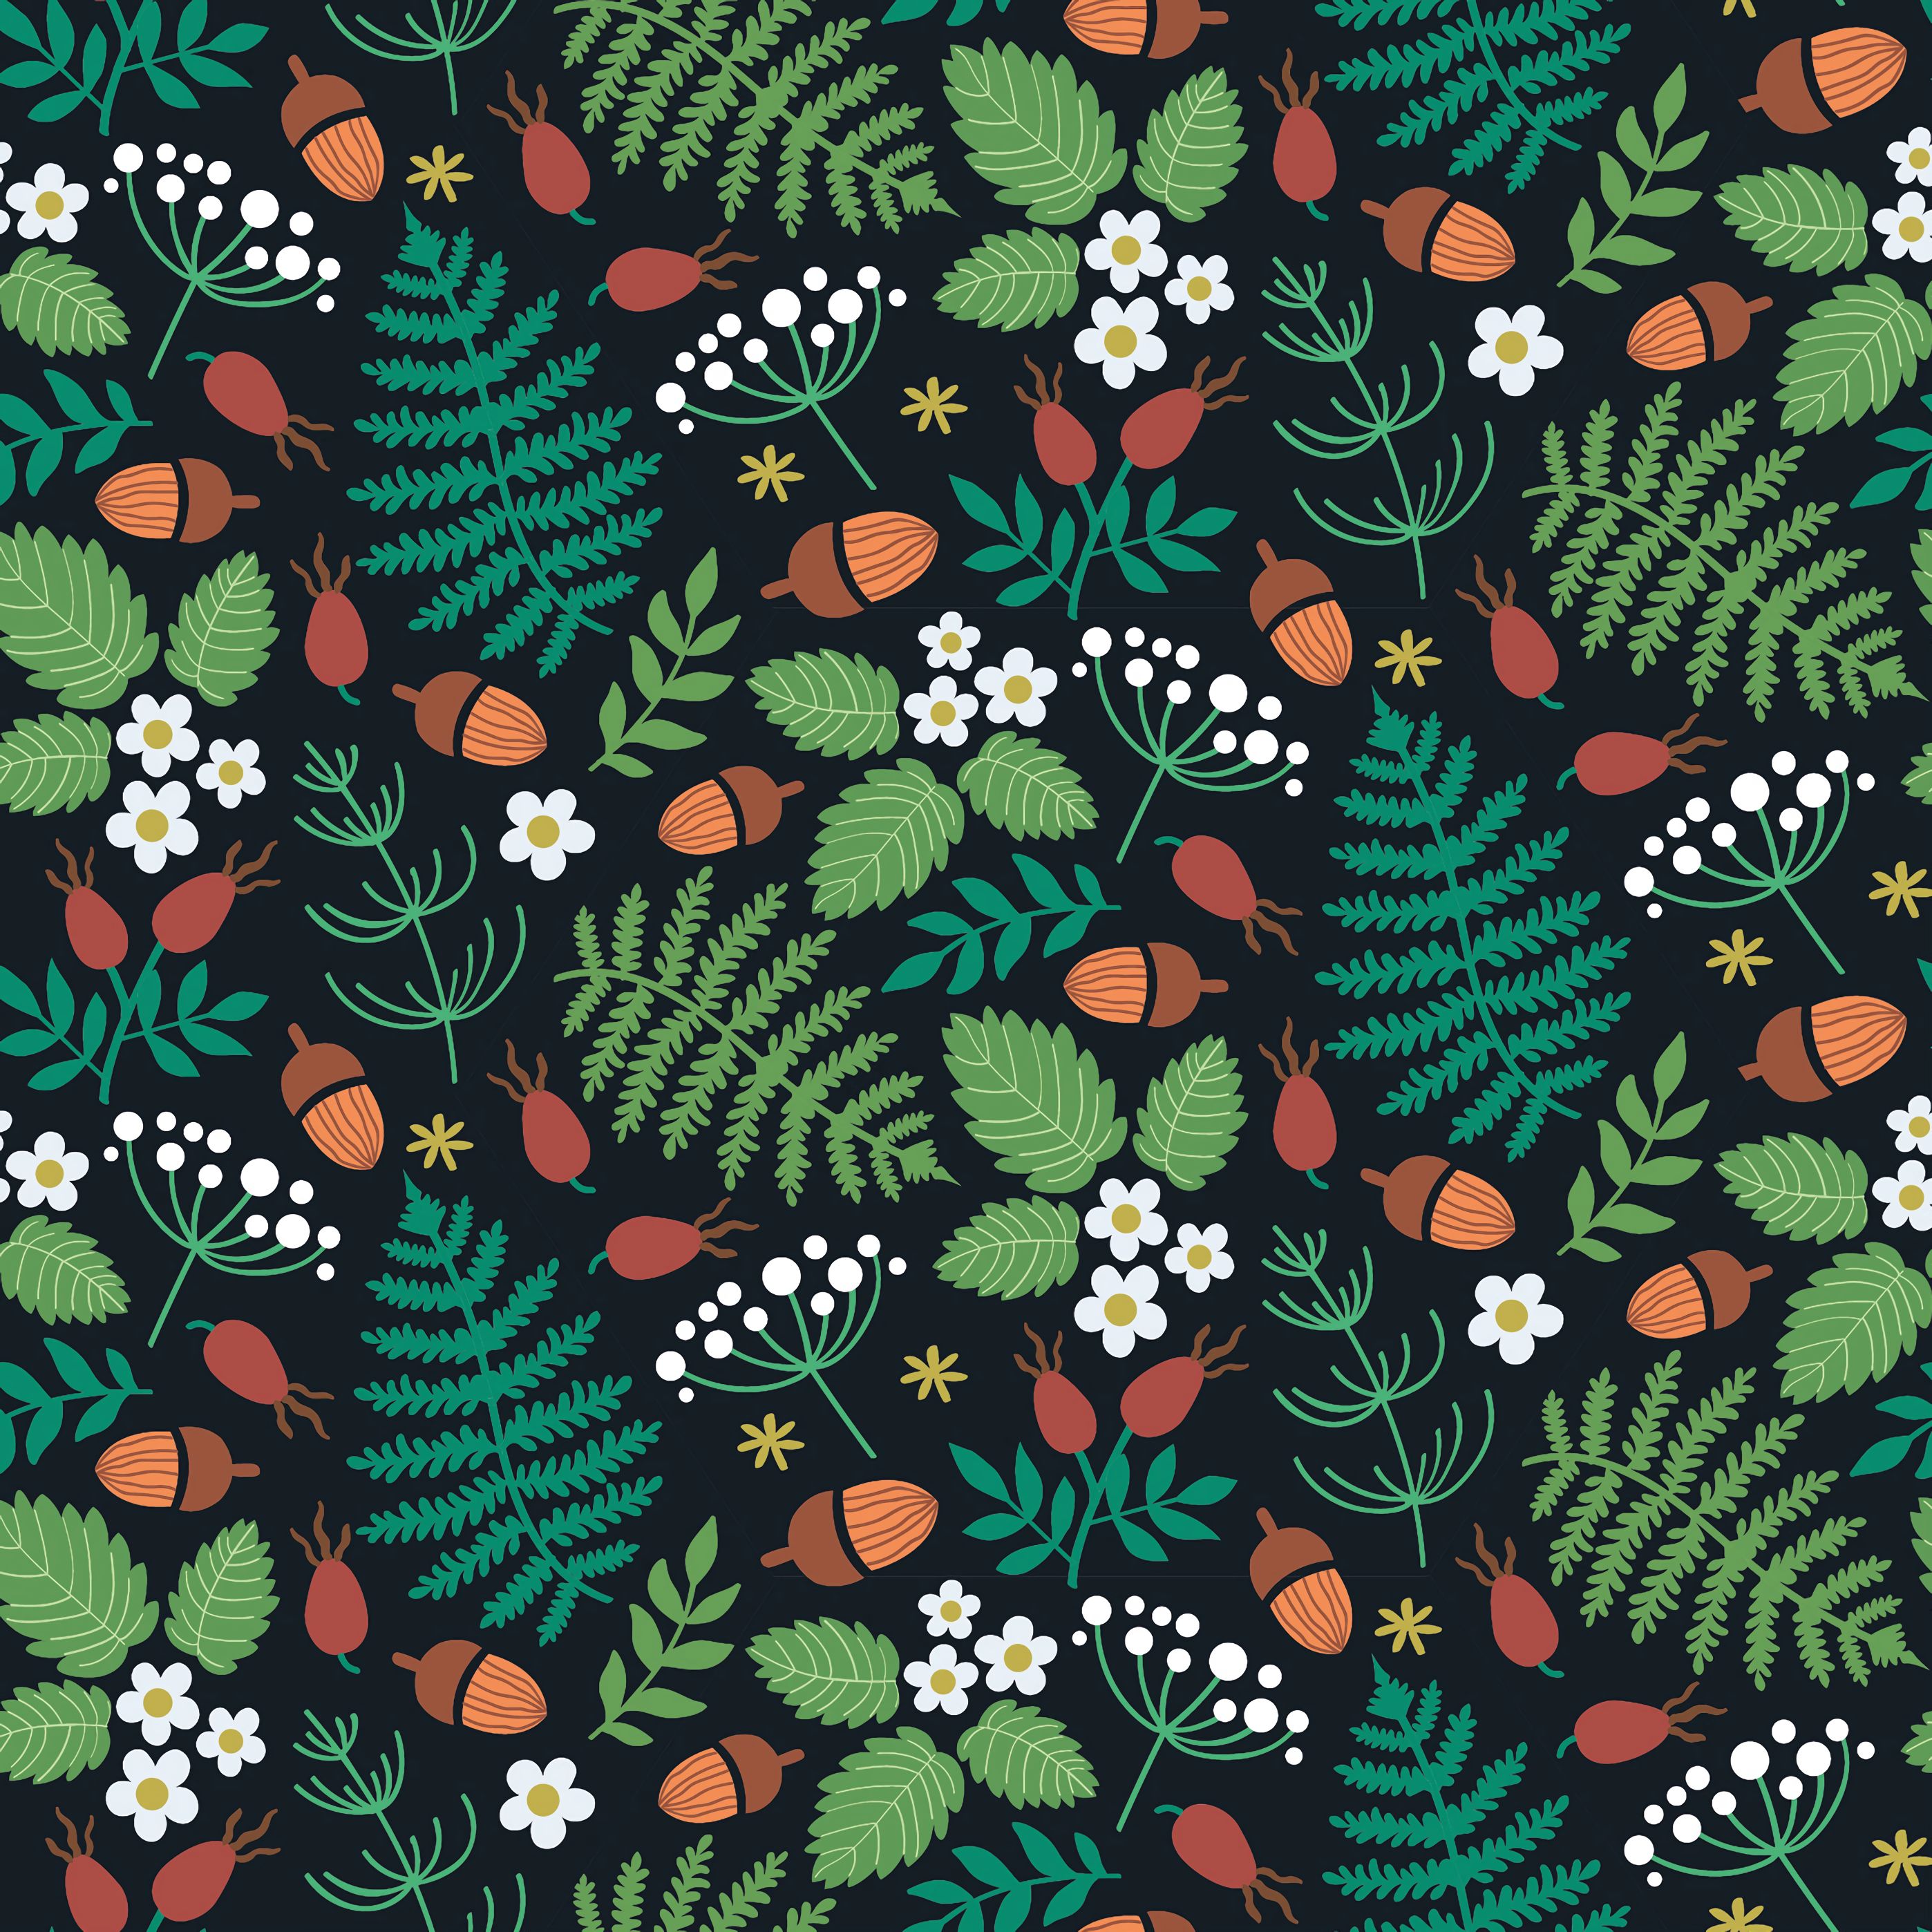 android texture, textures, forest, pattern, leaves, strawberry, berries, acorns, wild strawberries, motive